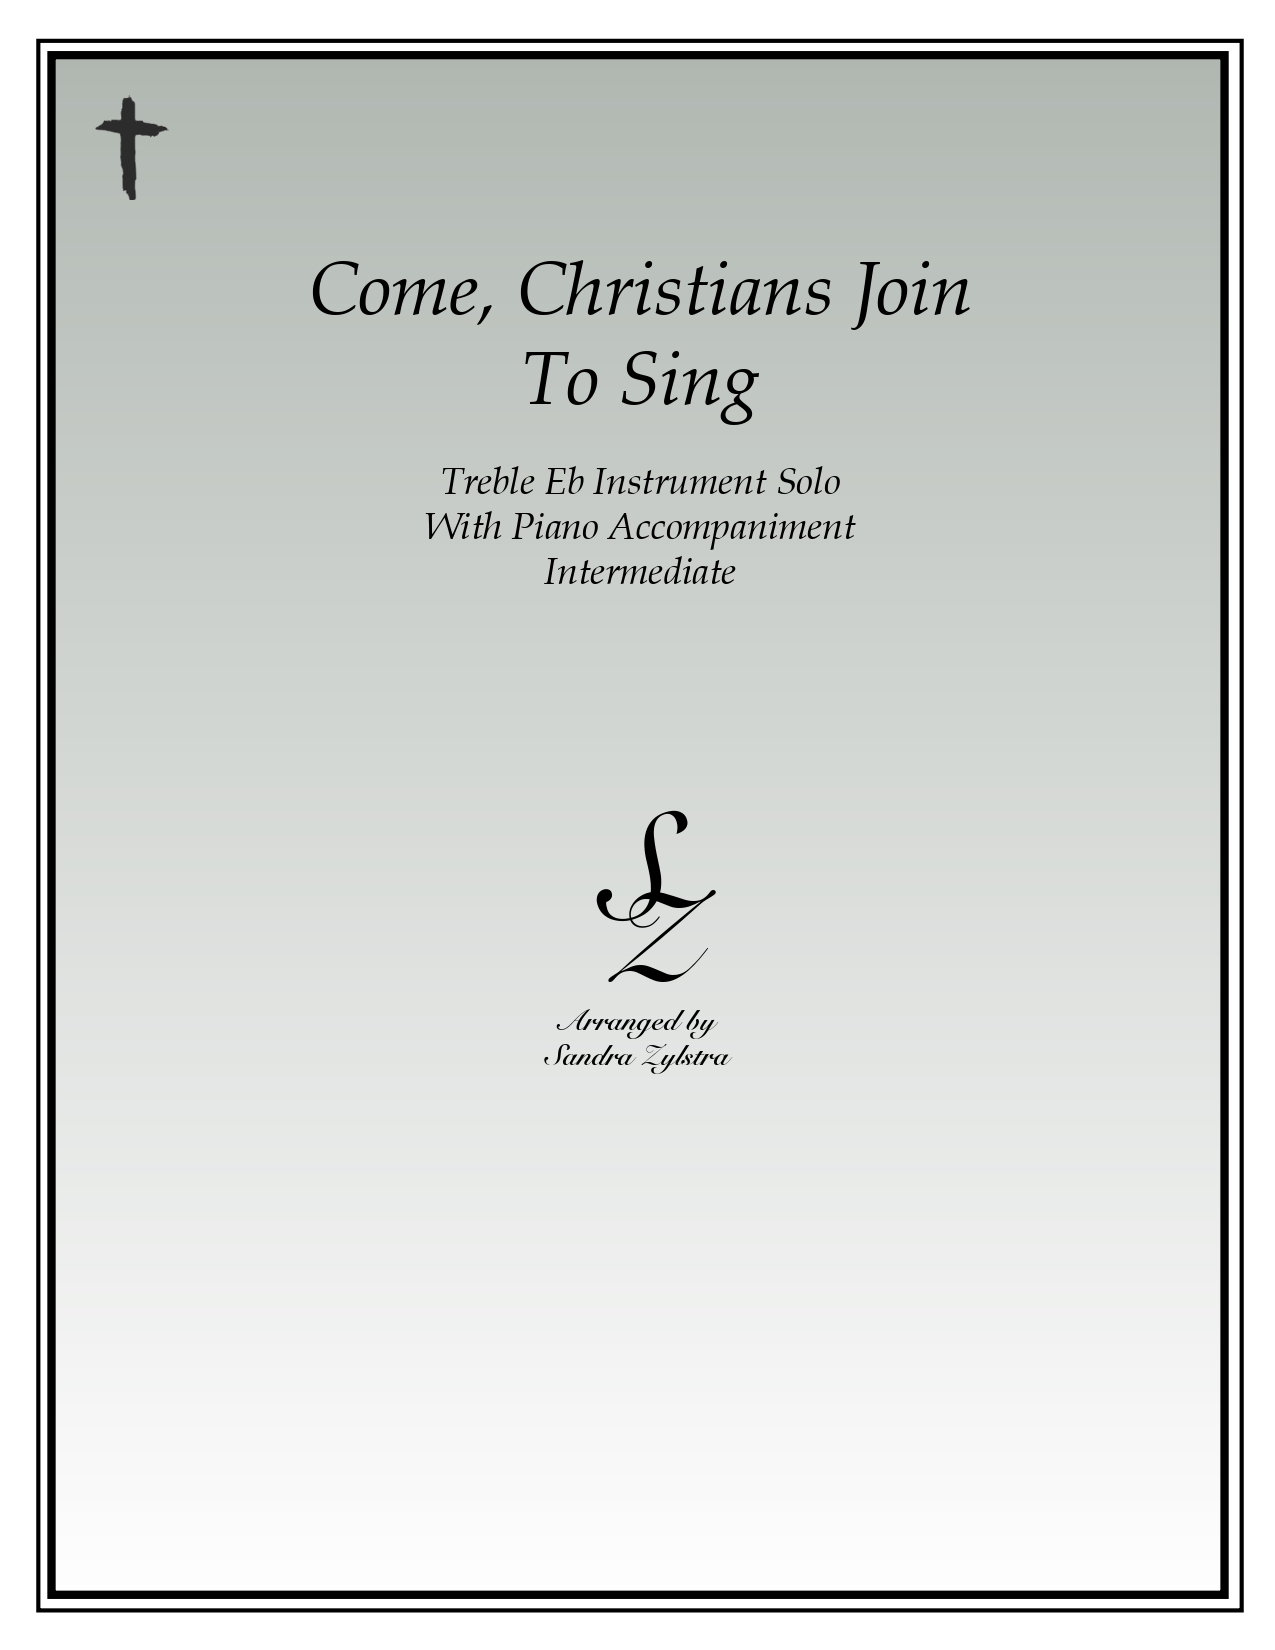 Come Christians Join To Sing Eb instrument solo part cover page 00011